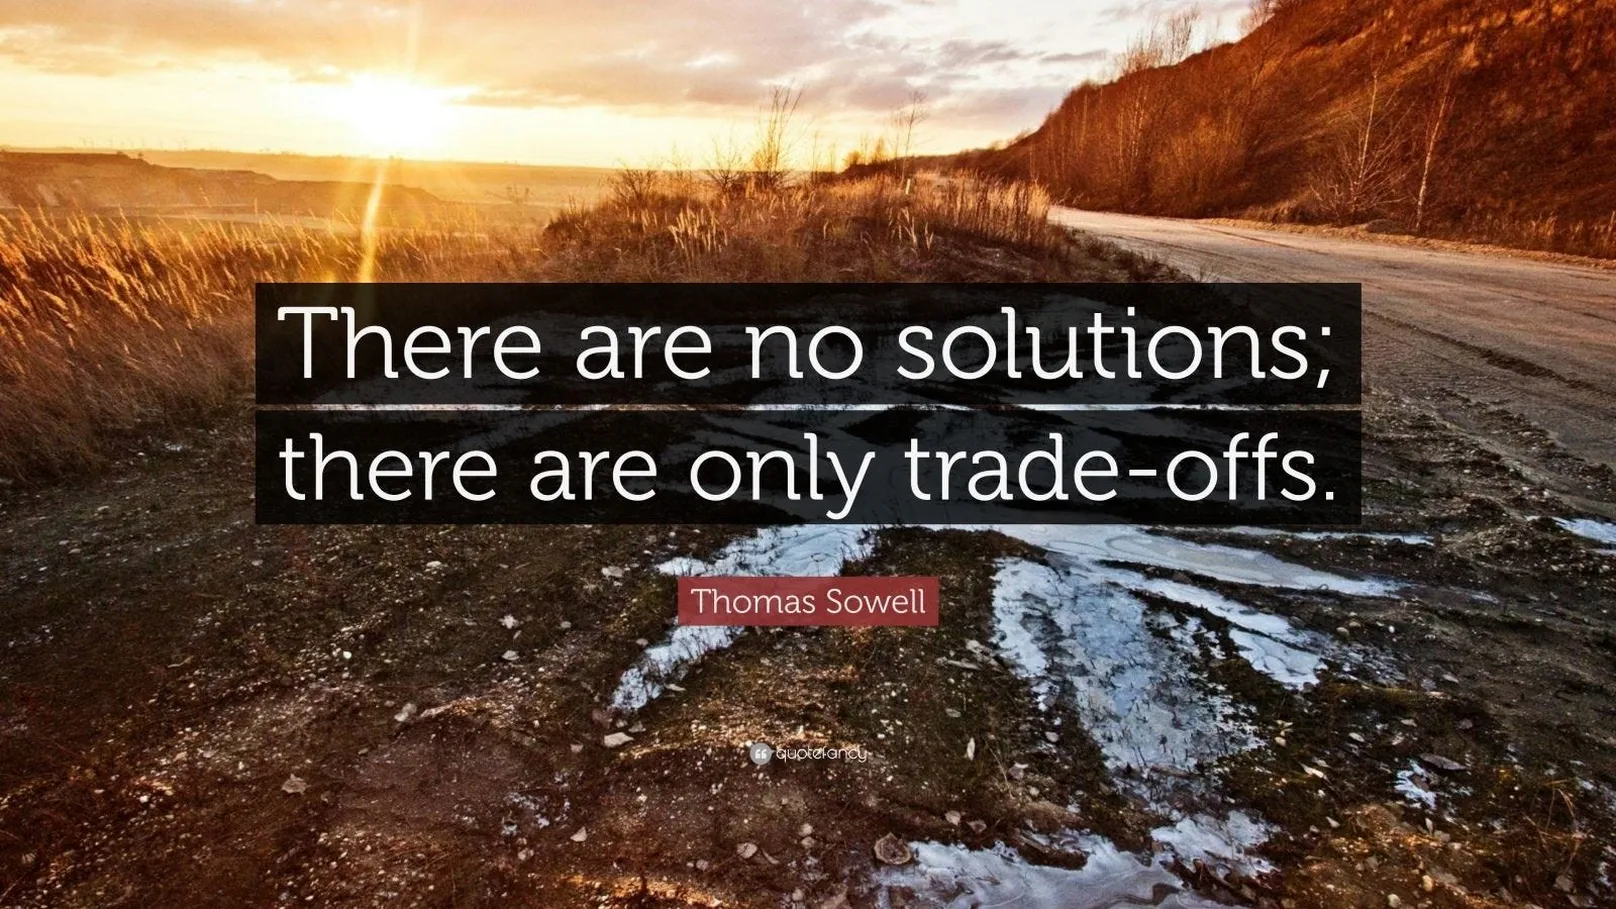 The are no solutions: there are only trade-offs.